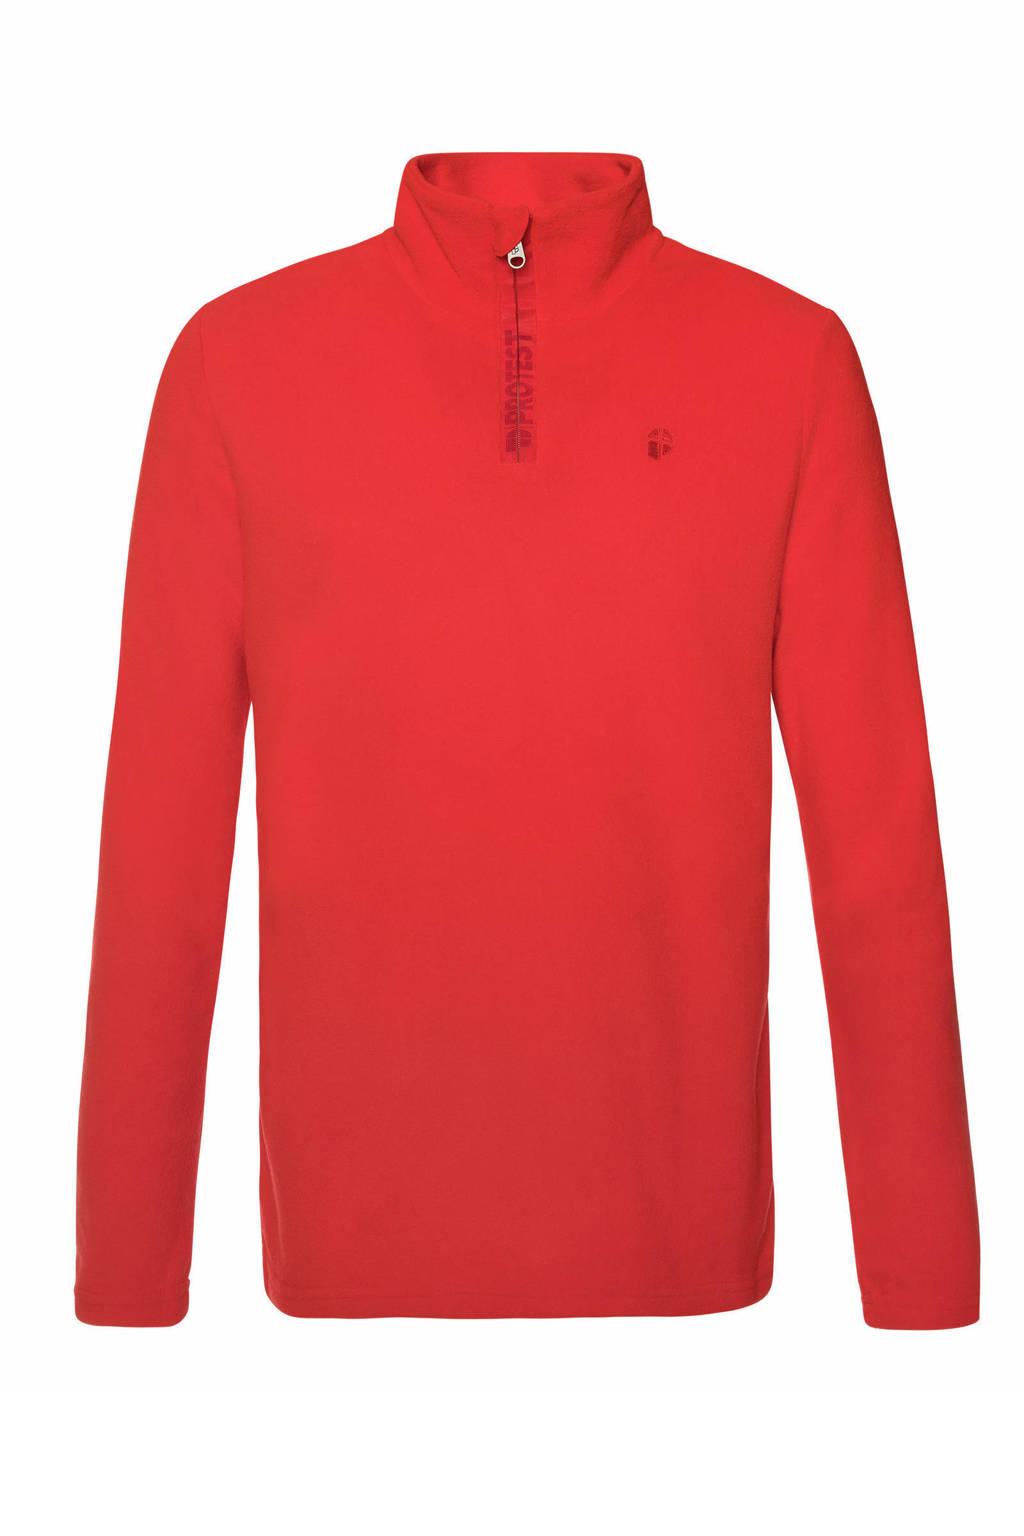 Protest skipully Perfecto rood, Mars Red